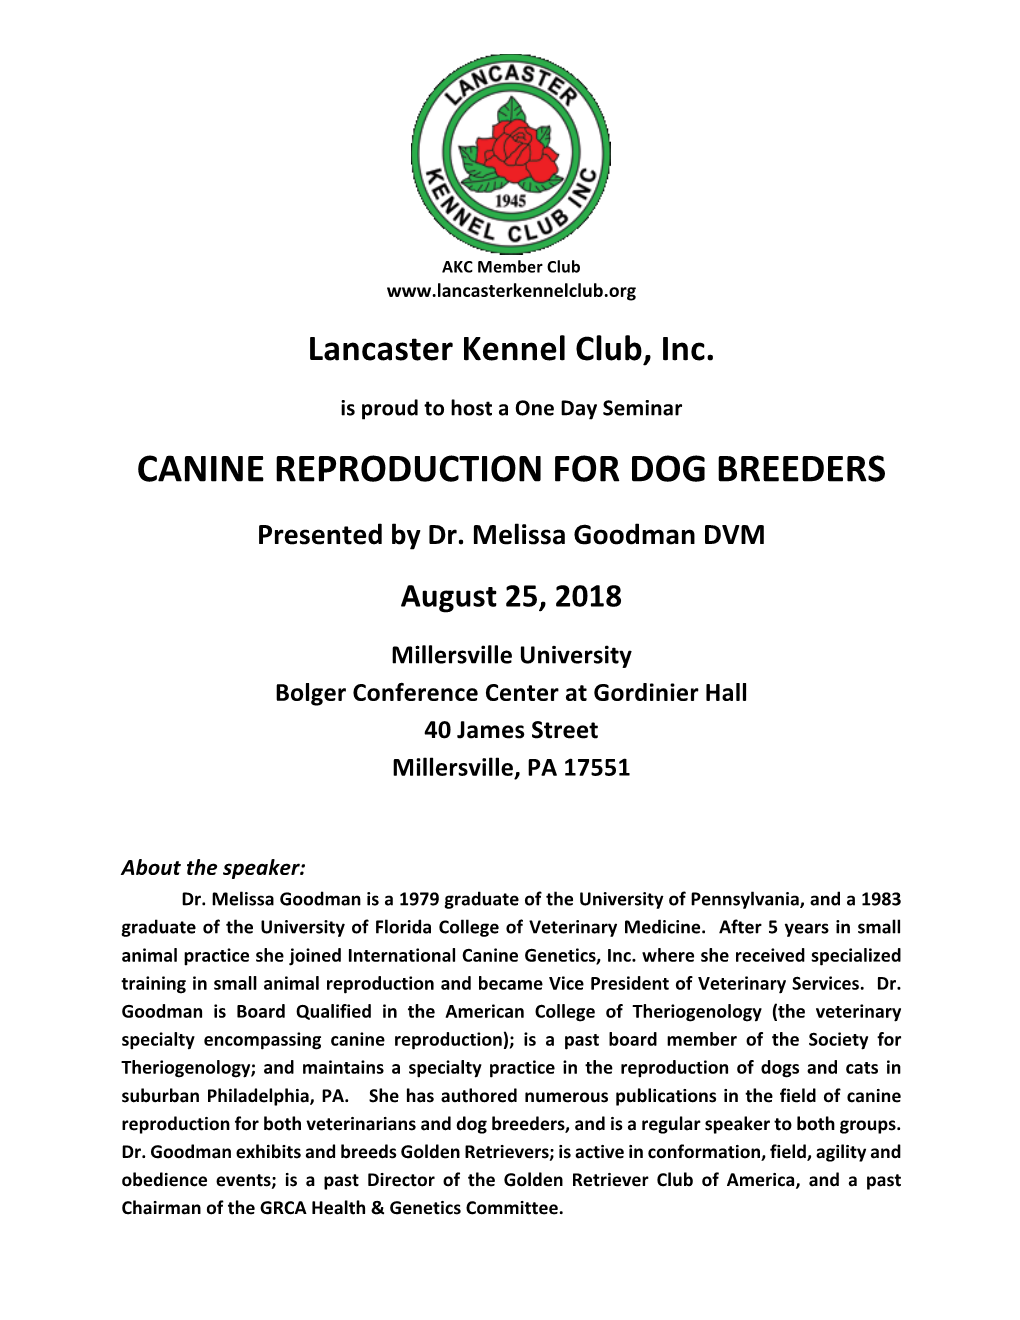 Canine Reproduction for Dog Breeders